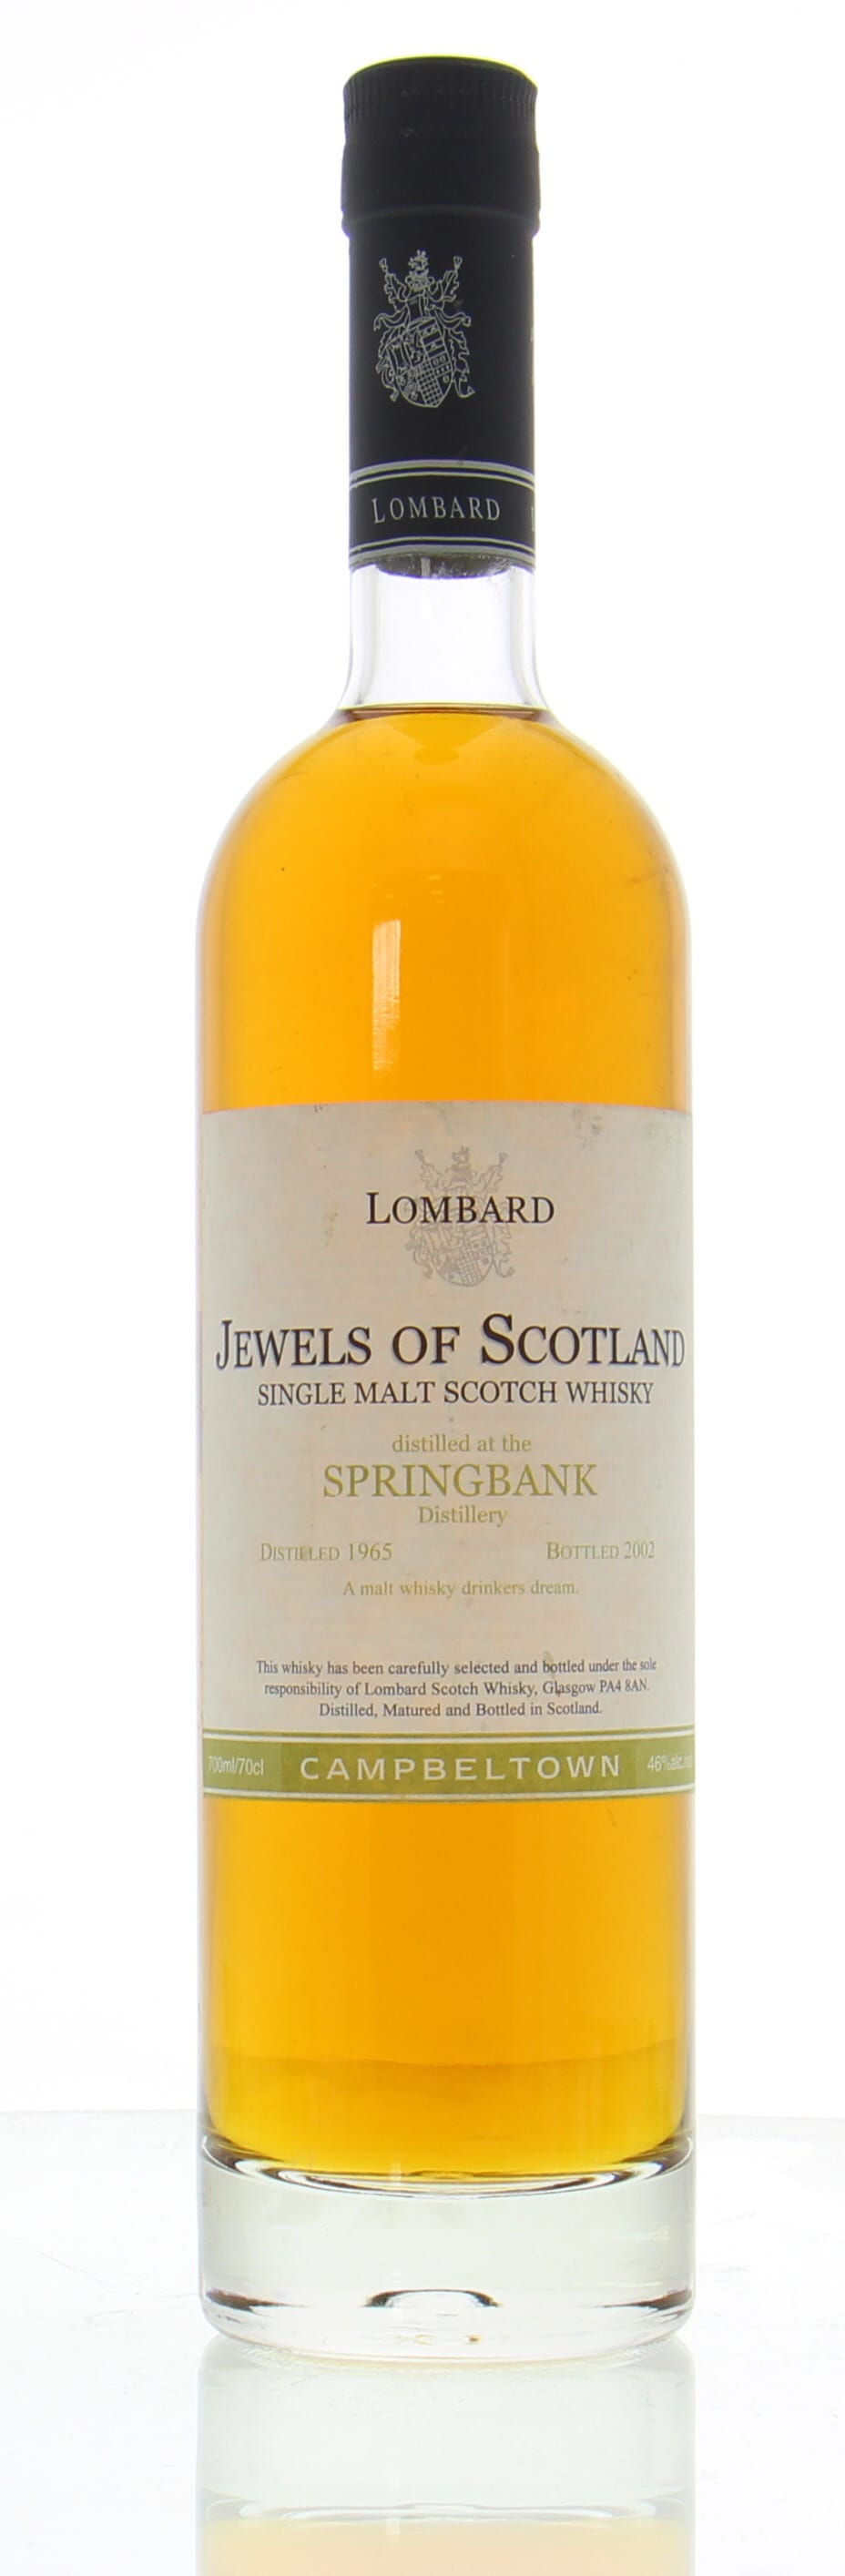 Springbank - 37 Years Old Jewels of Scotland 46% 1965